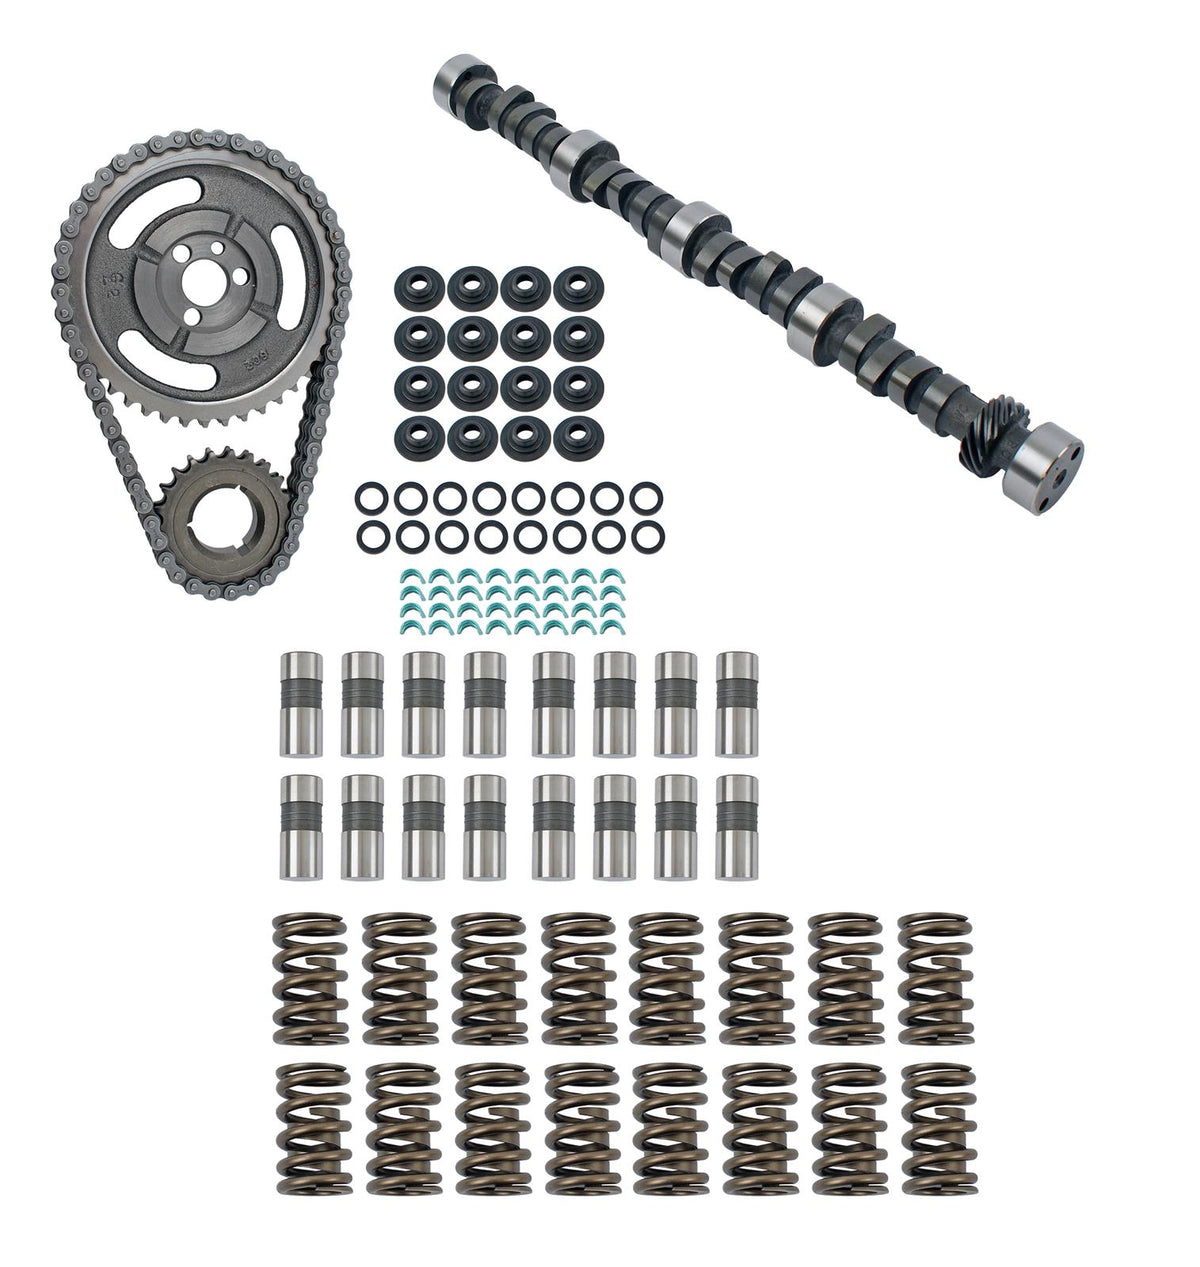 COMP Cams K12-600-4 - COMP Cams Thumpr Hydraulic Flat Tappet Cam and Lifter Kits